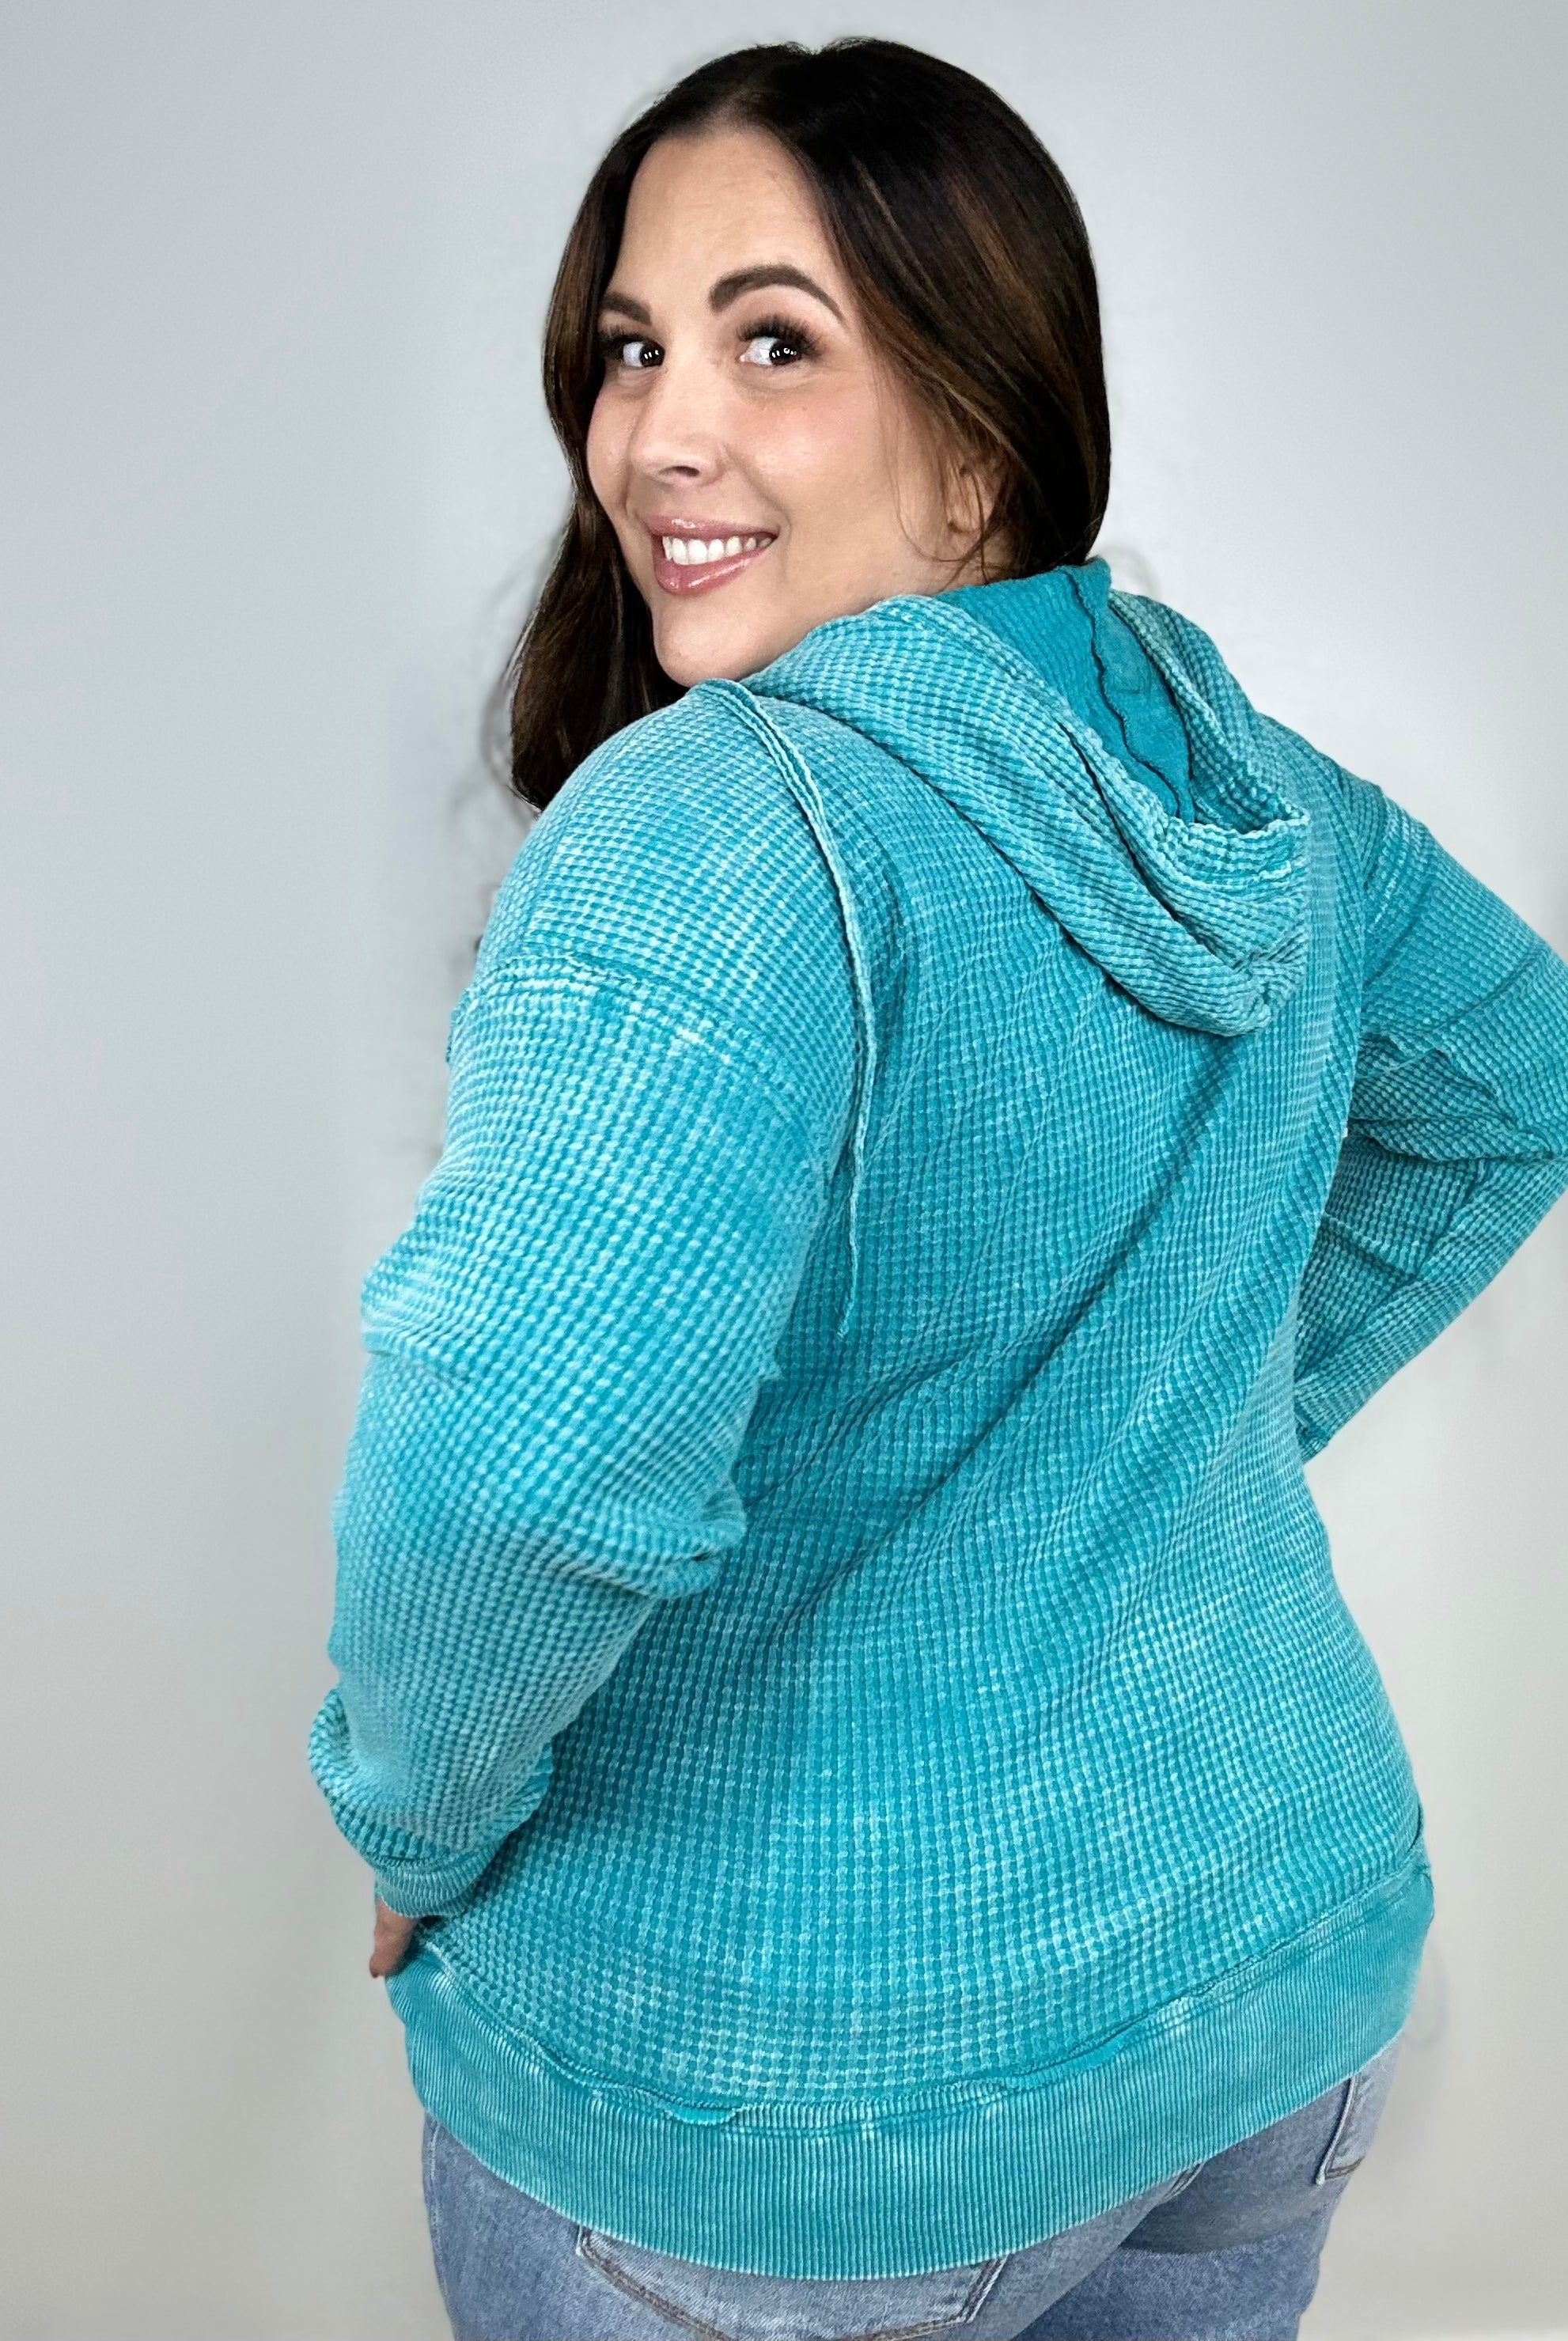 Instant Comfort Hoodie-210 Hoodies-ZENANA-Heathered Boho Boutique, Women's Fashion and Accessories in Palmetto, FL